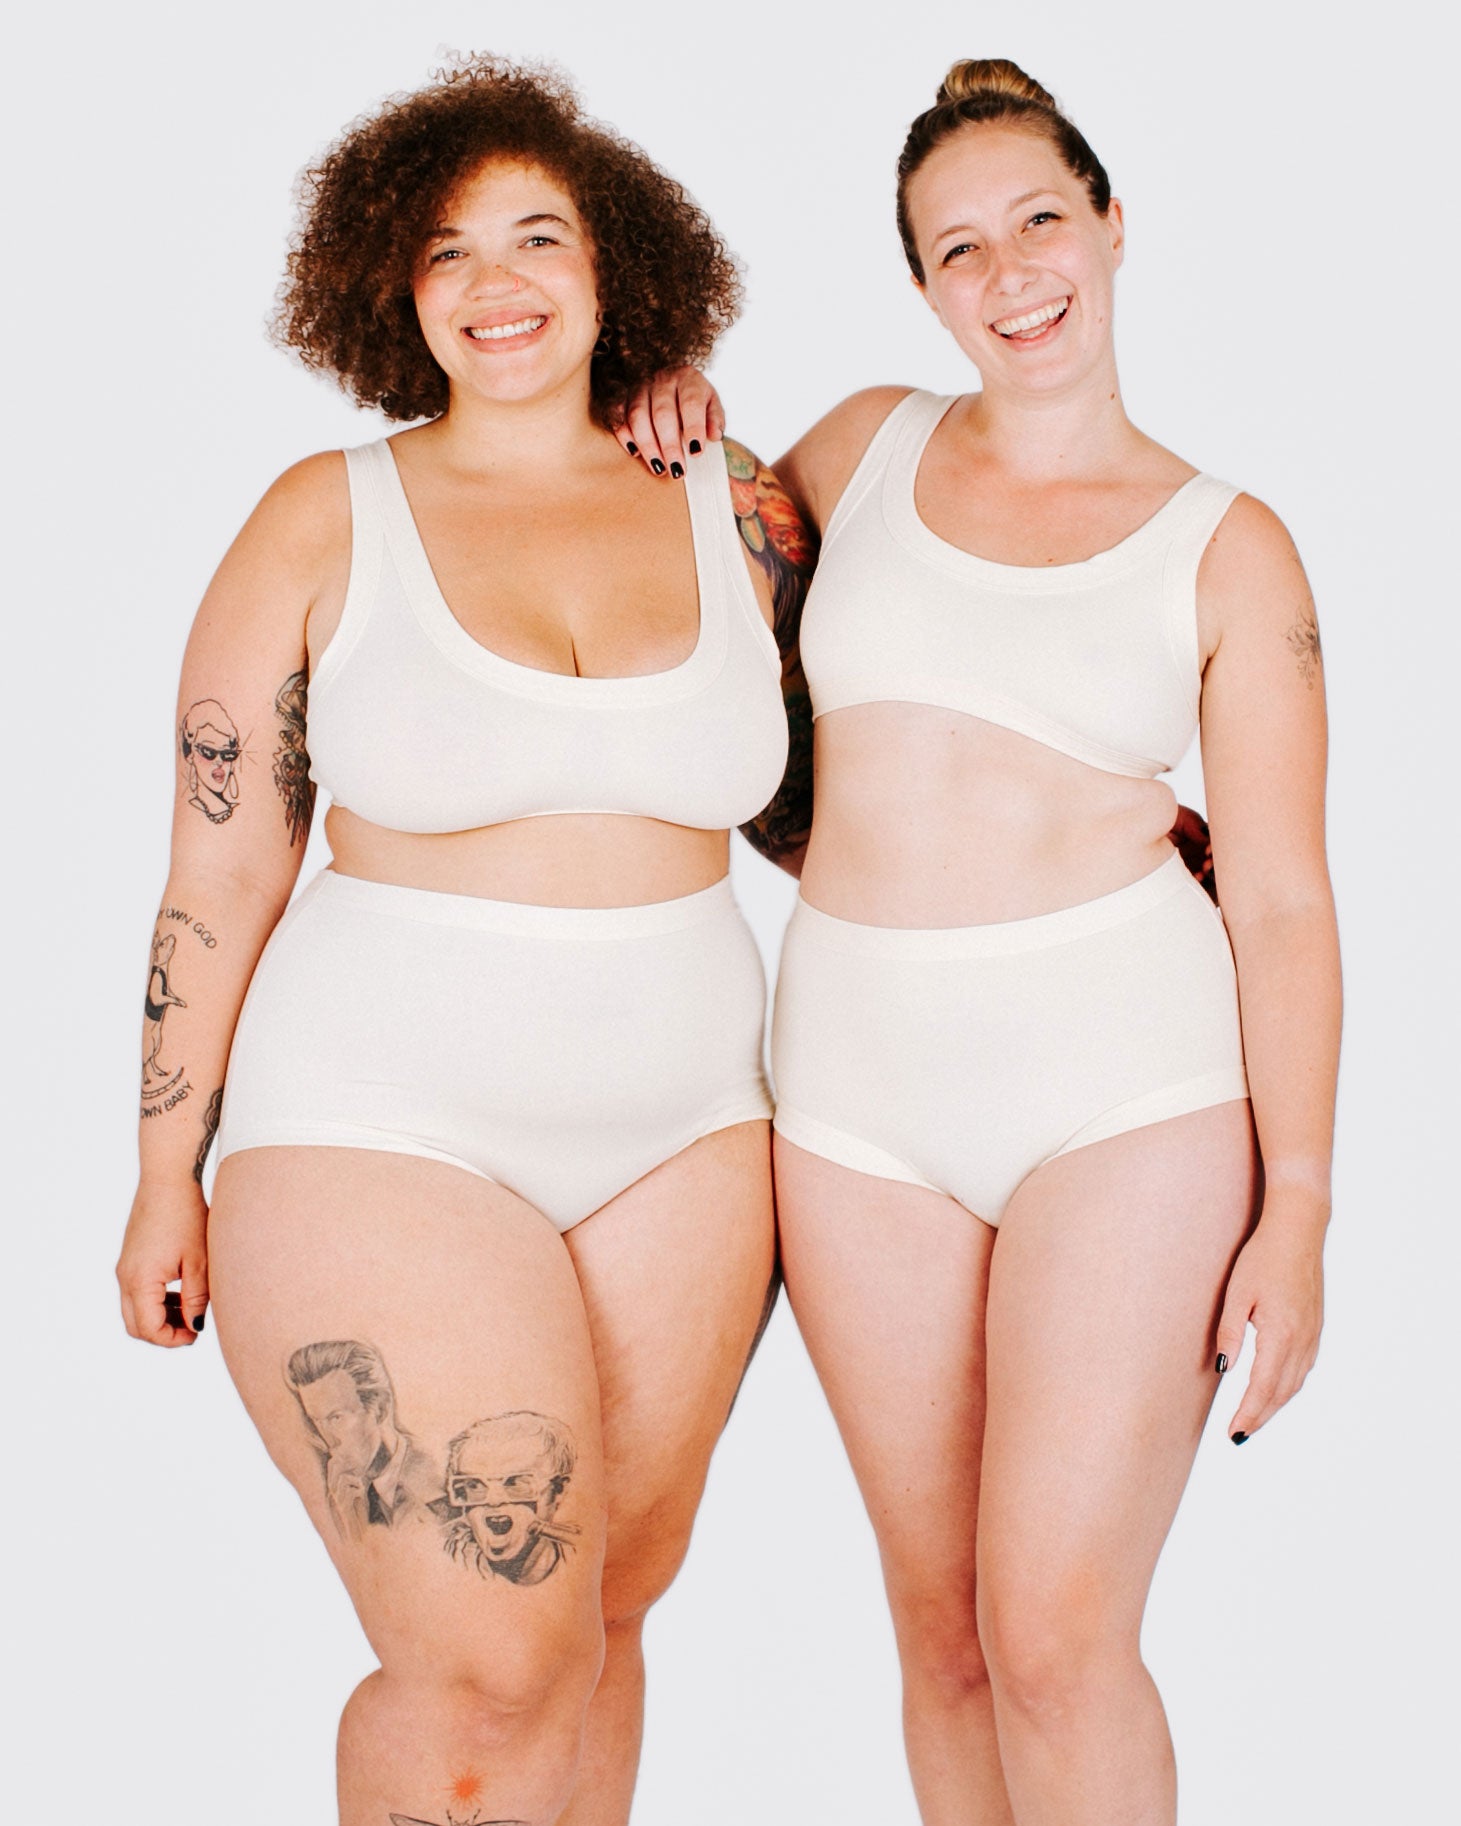 Fit photo from the front of Thunderpants organic cotton Original style underwear and Bralette in off-white on two models standing together.